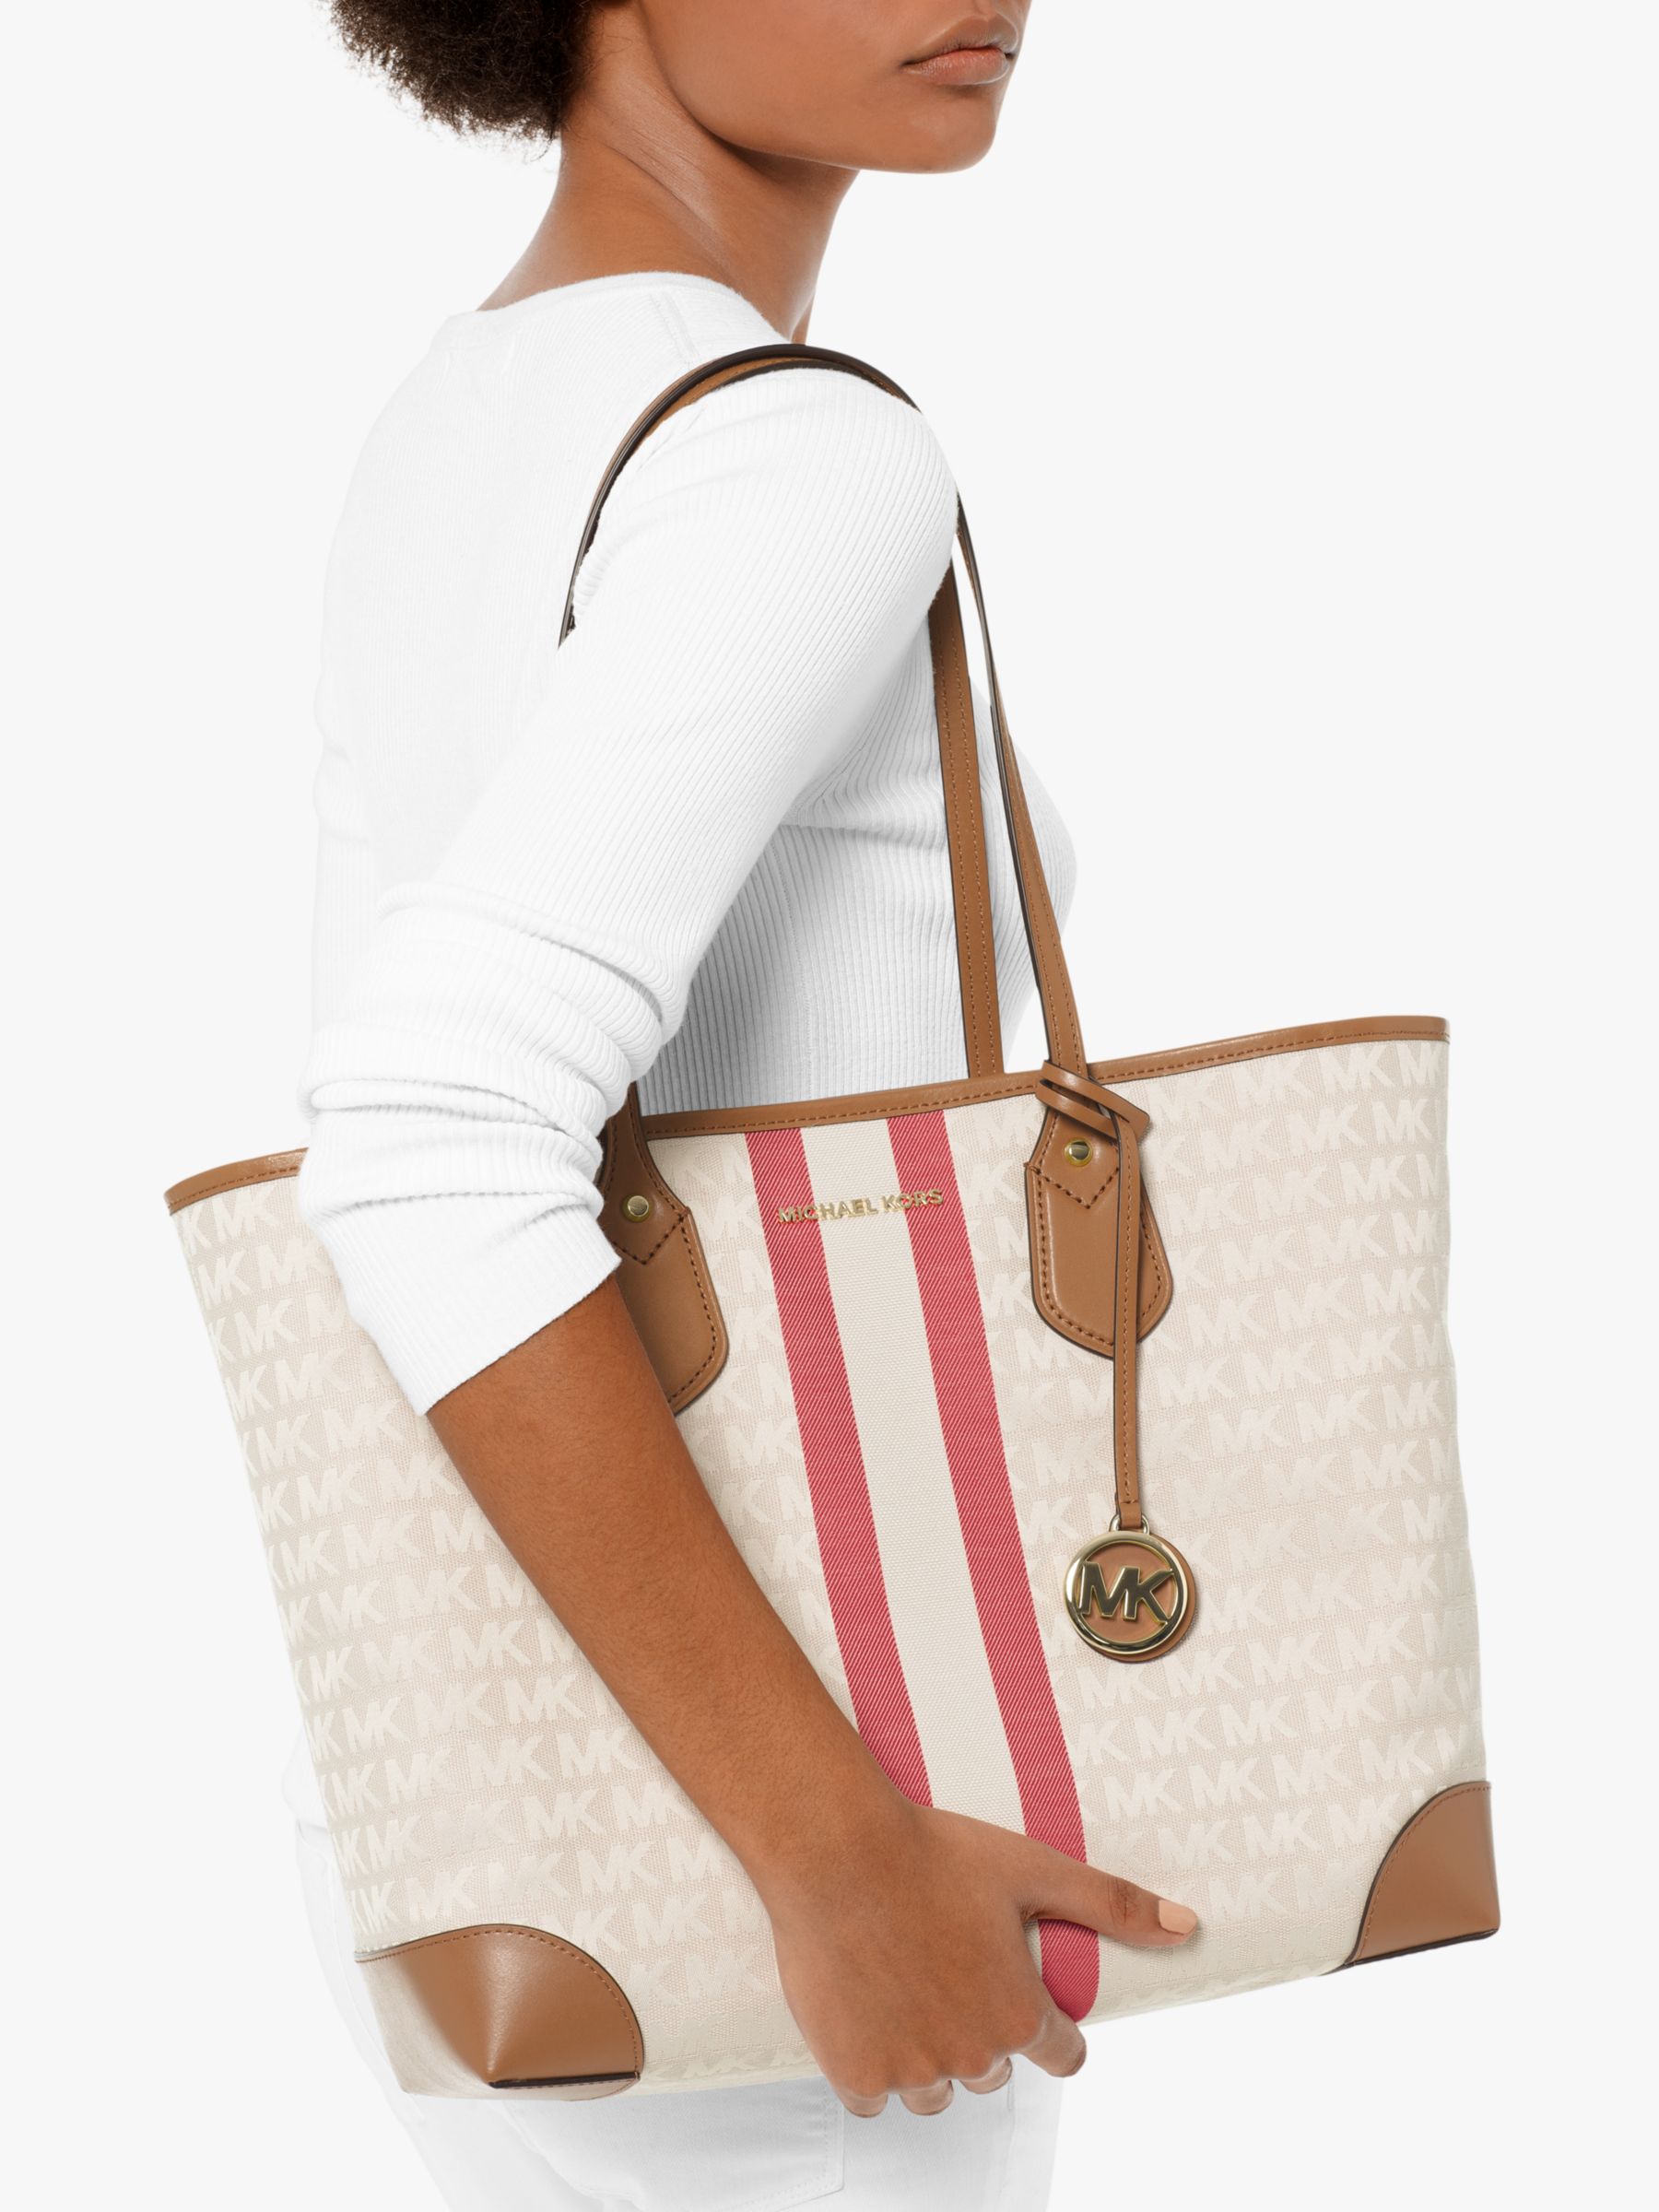 red and white striped michael kors purse